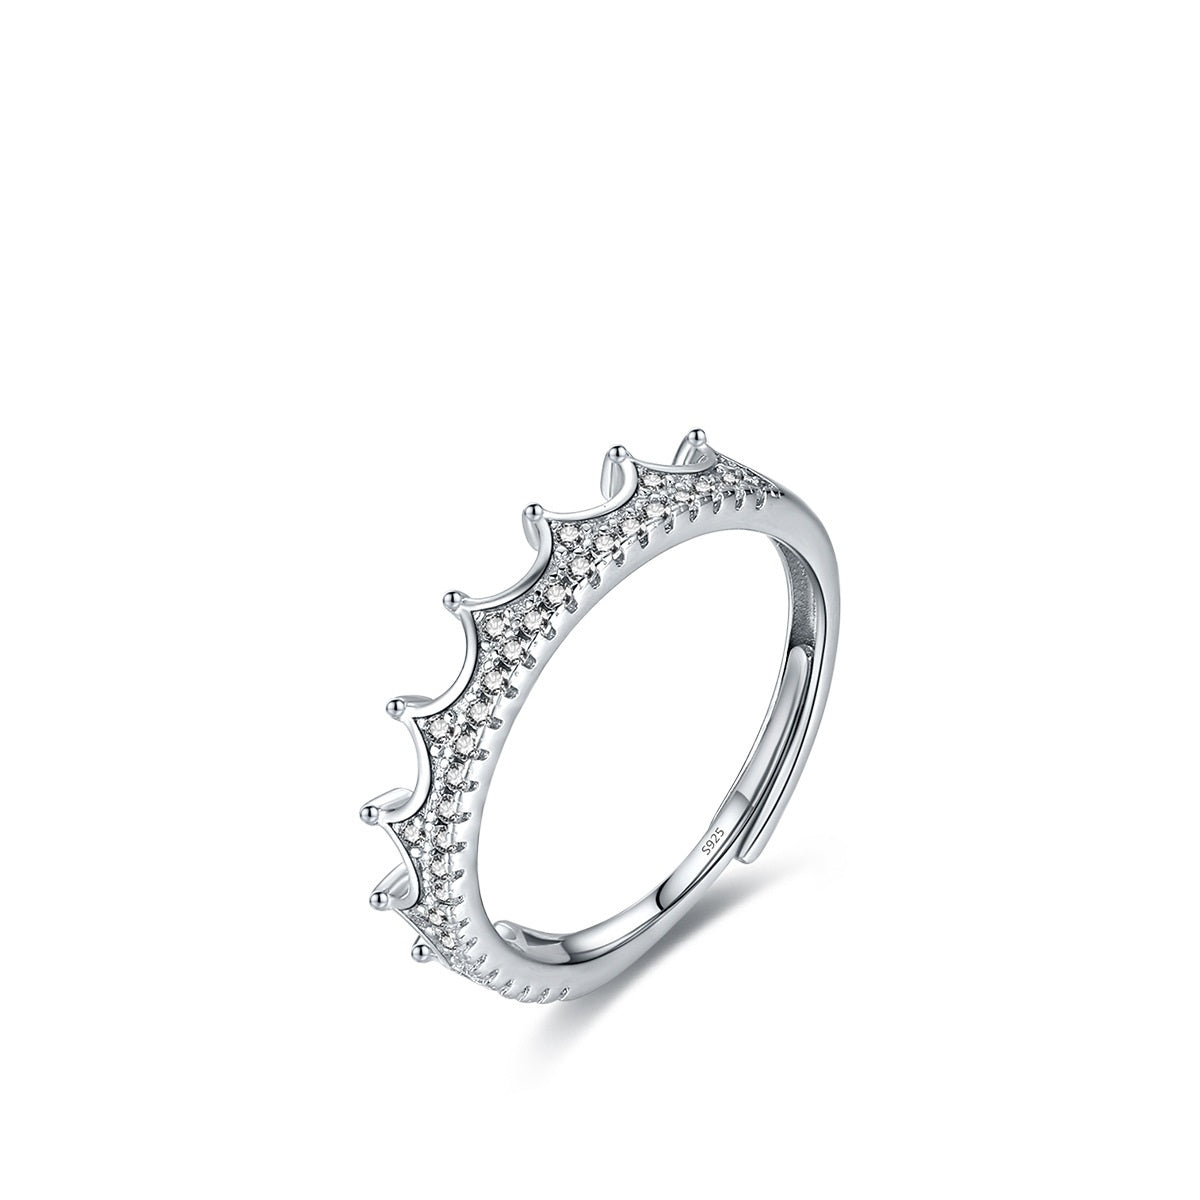 S925 Sterling Silver Micro-inlaid Diamond Crown Simple Fashion Normcore Style Adjustable Ring